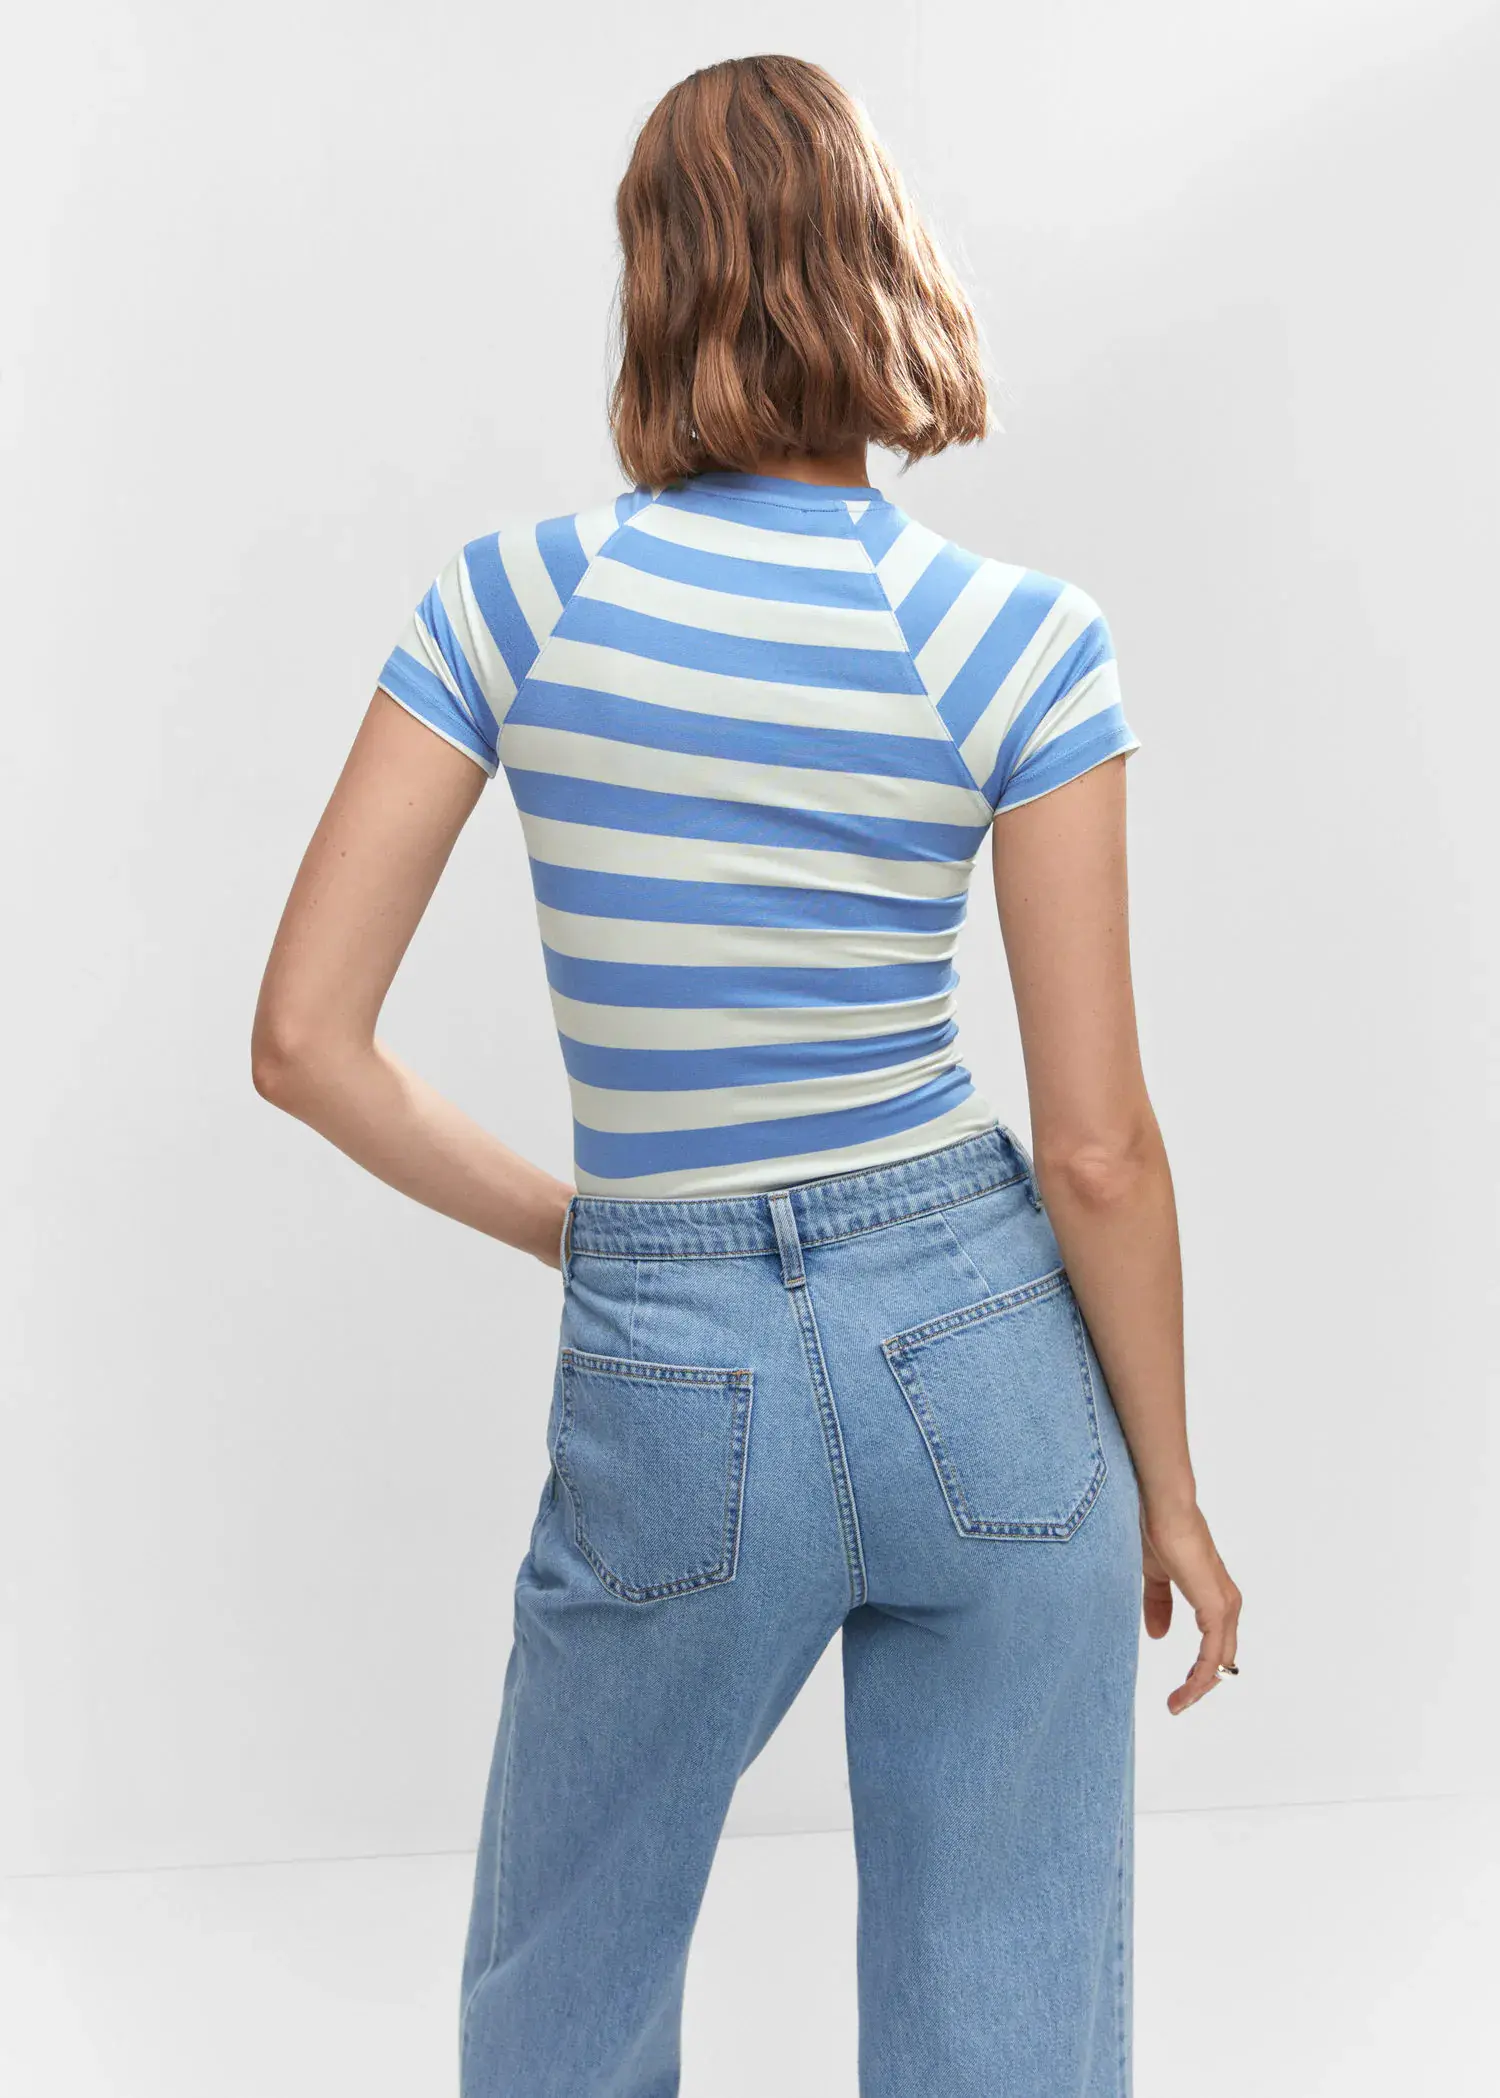 Mango Striped print T-shirt. a woman in a blue and white striped shirt and jeans. 